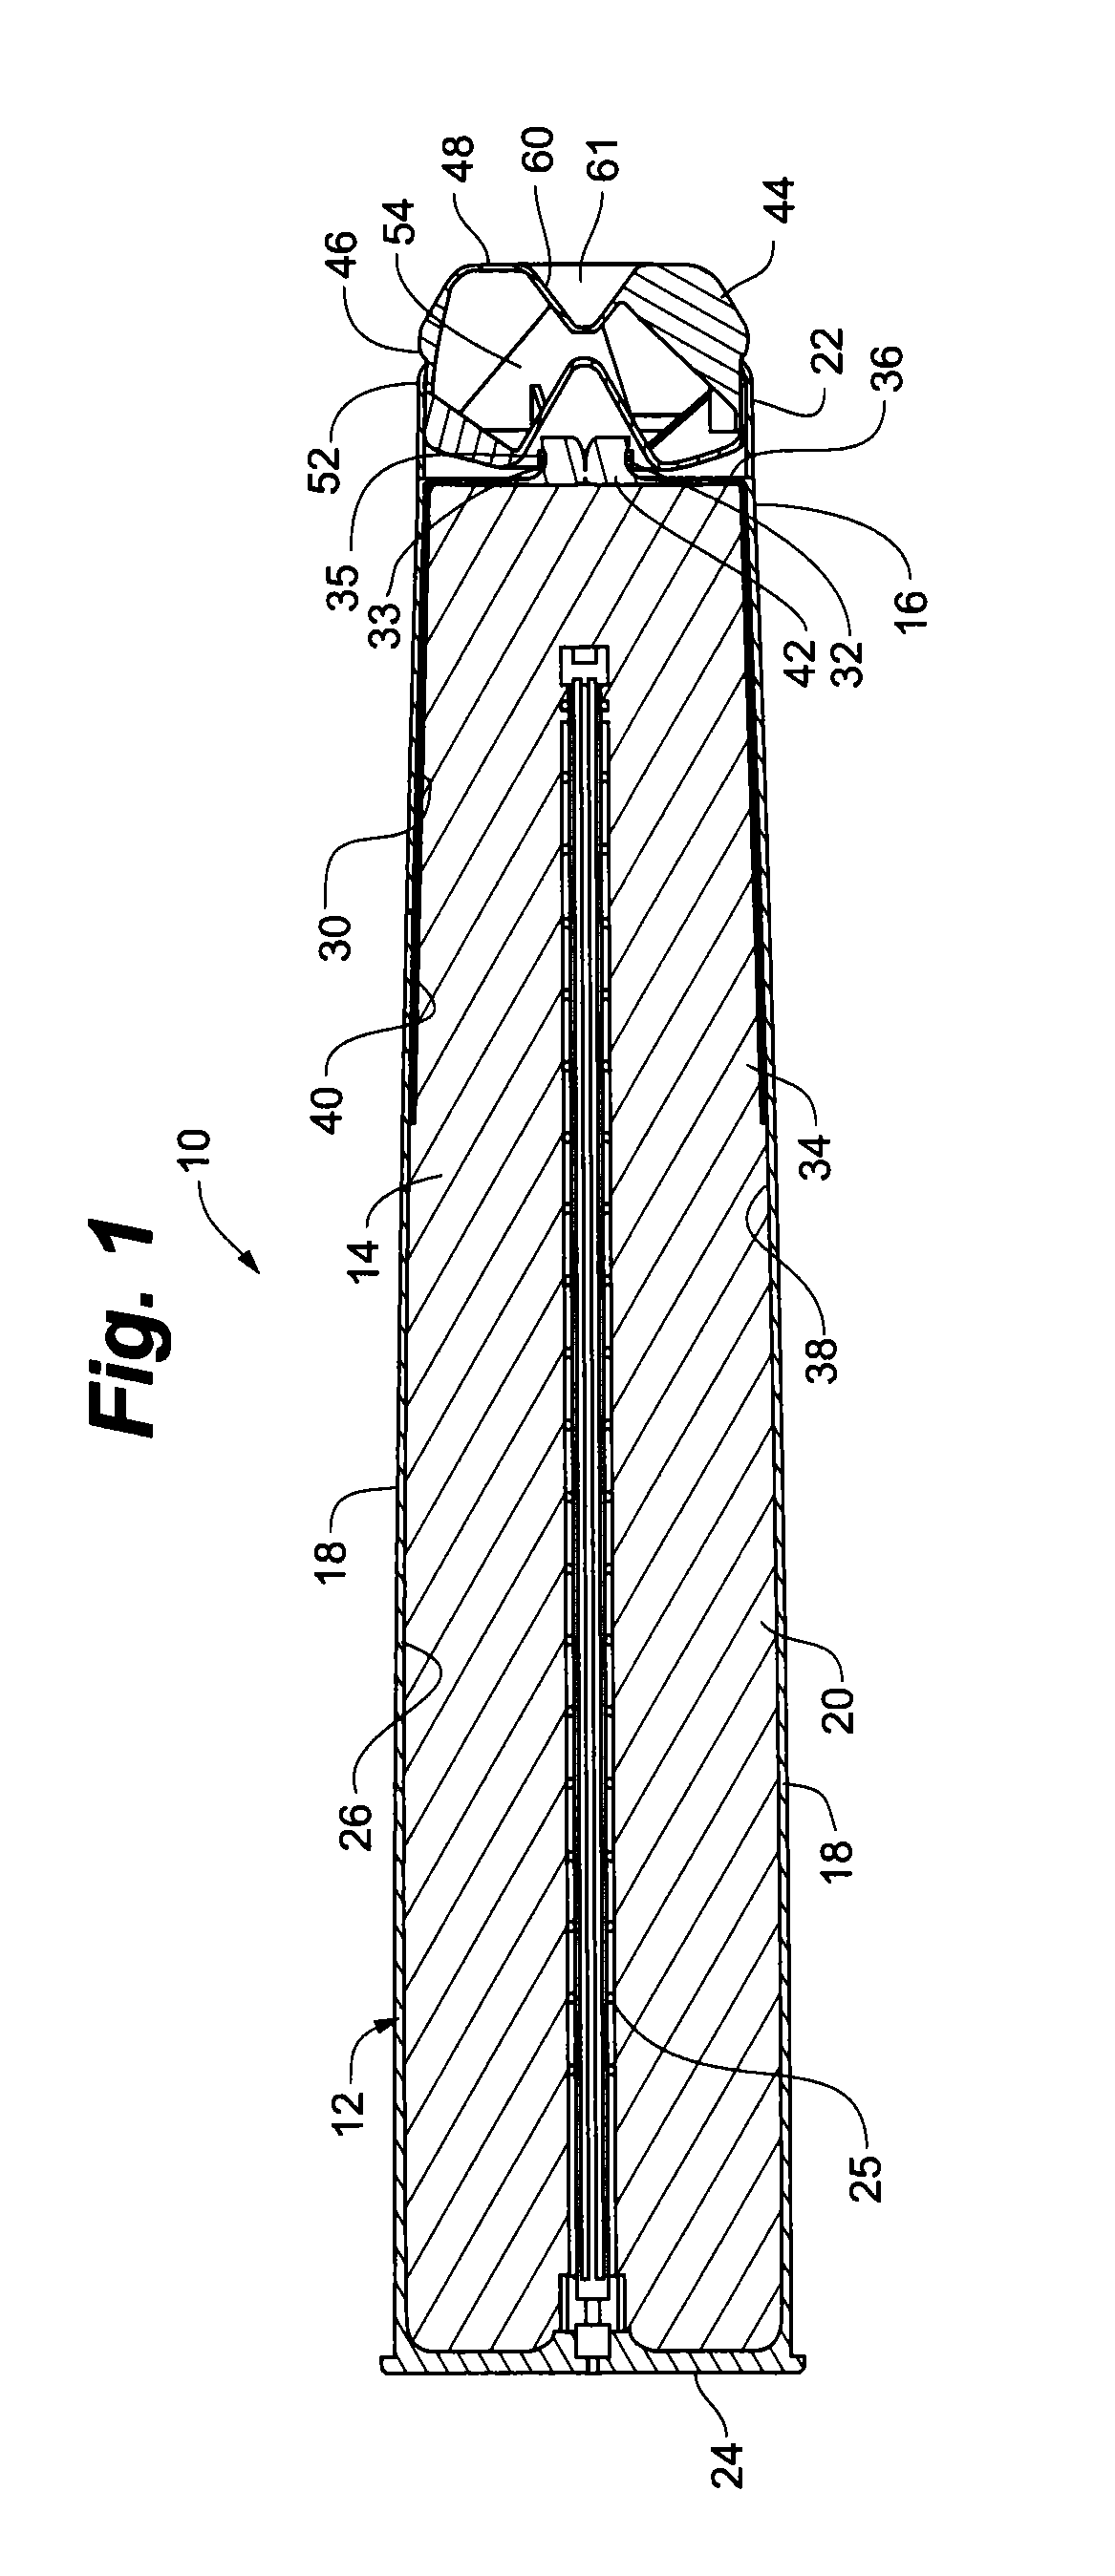 Cartridge assembly having an integrated retention system